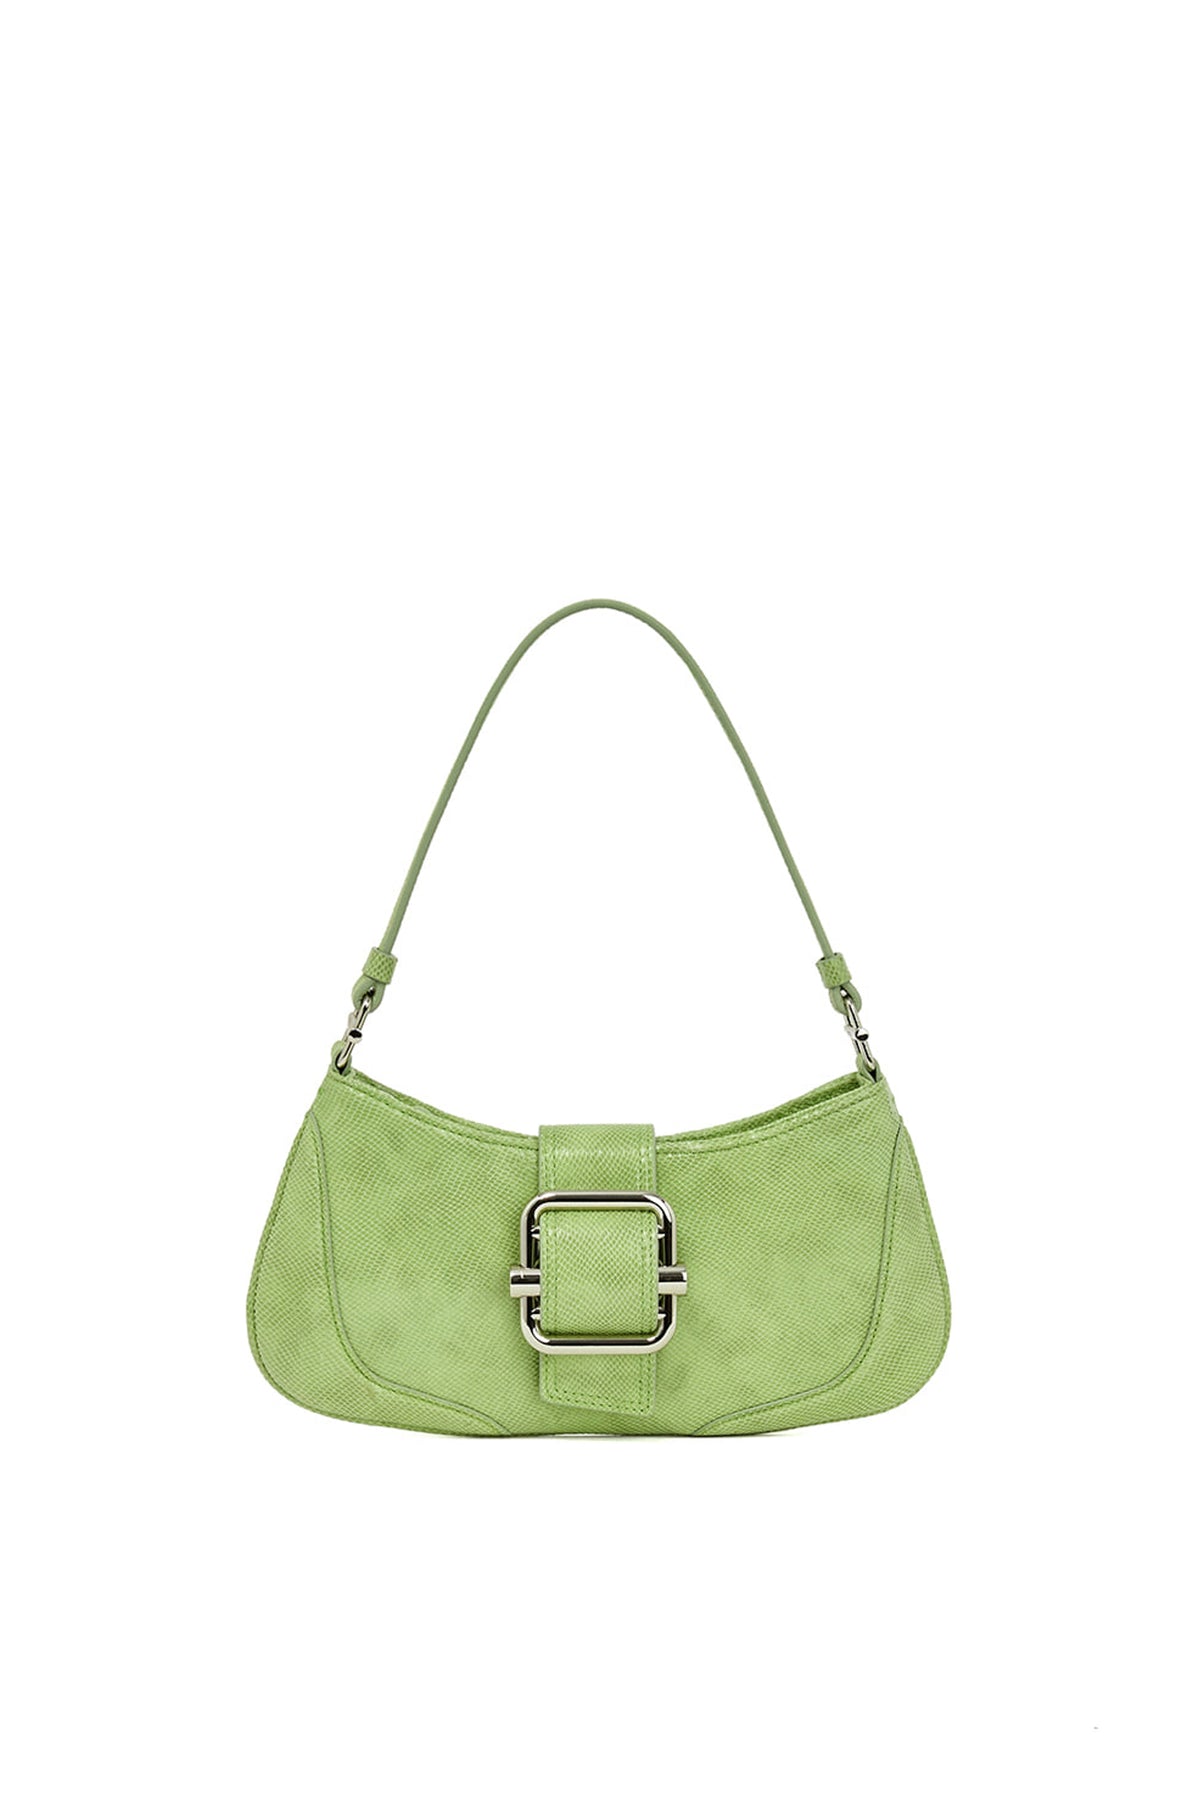 SHOULDER BROCLE SMALL / CLOUD LIME GREEN